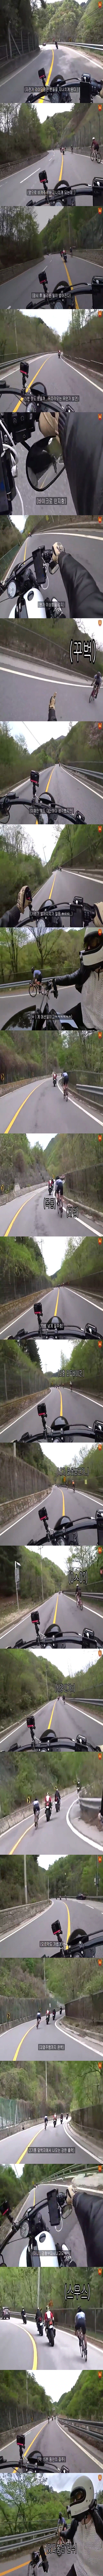 A monster that follows a motorcycle.